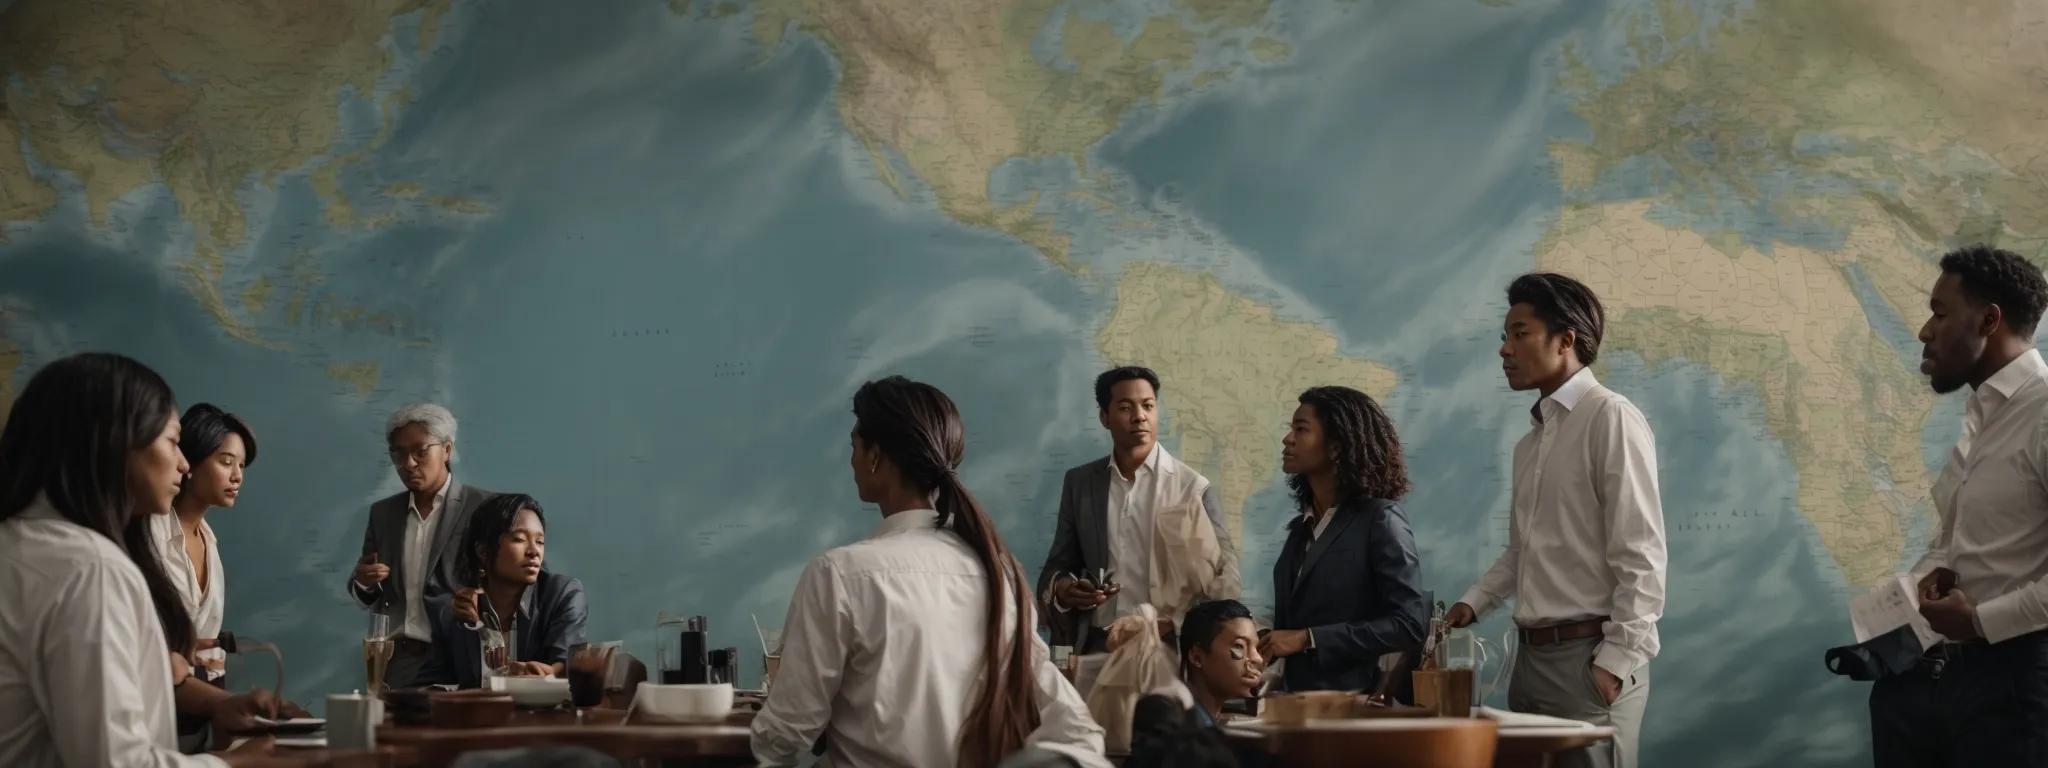 a diverse group of professionals gathered around a large world map, intently analyzing and pointing to various regions.